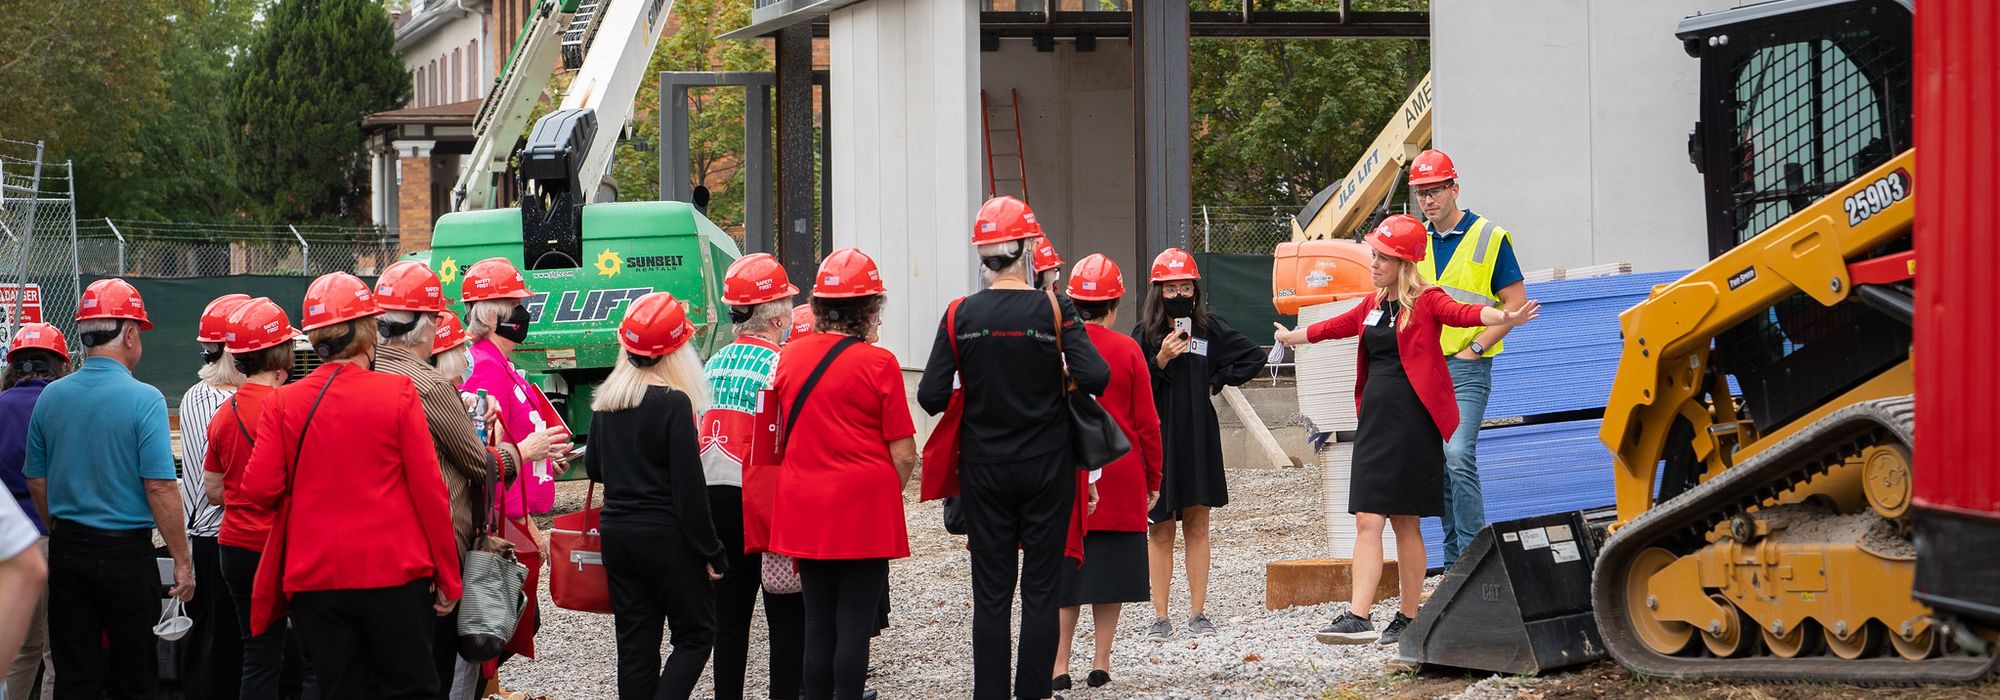 group of alumni touring the new building construction site during Homecoming weekend